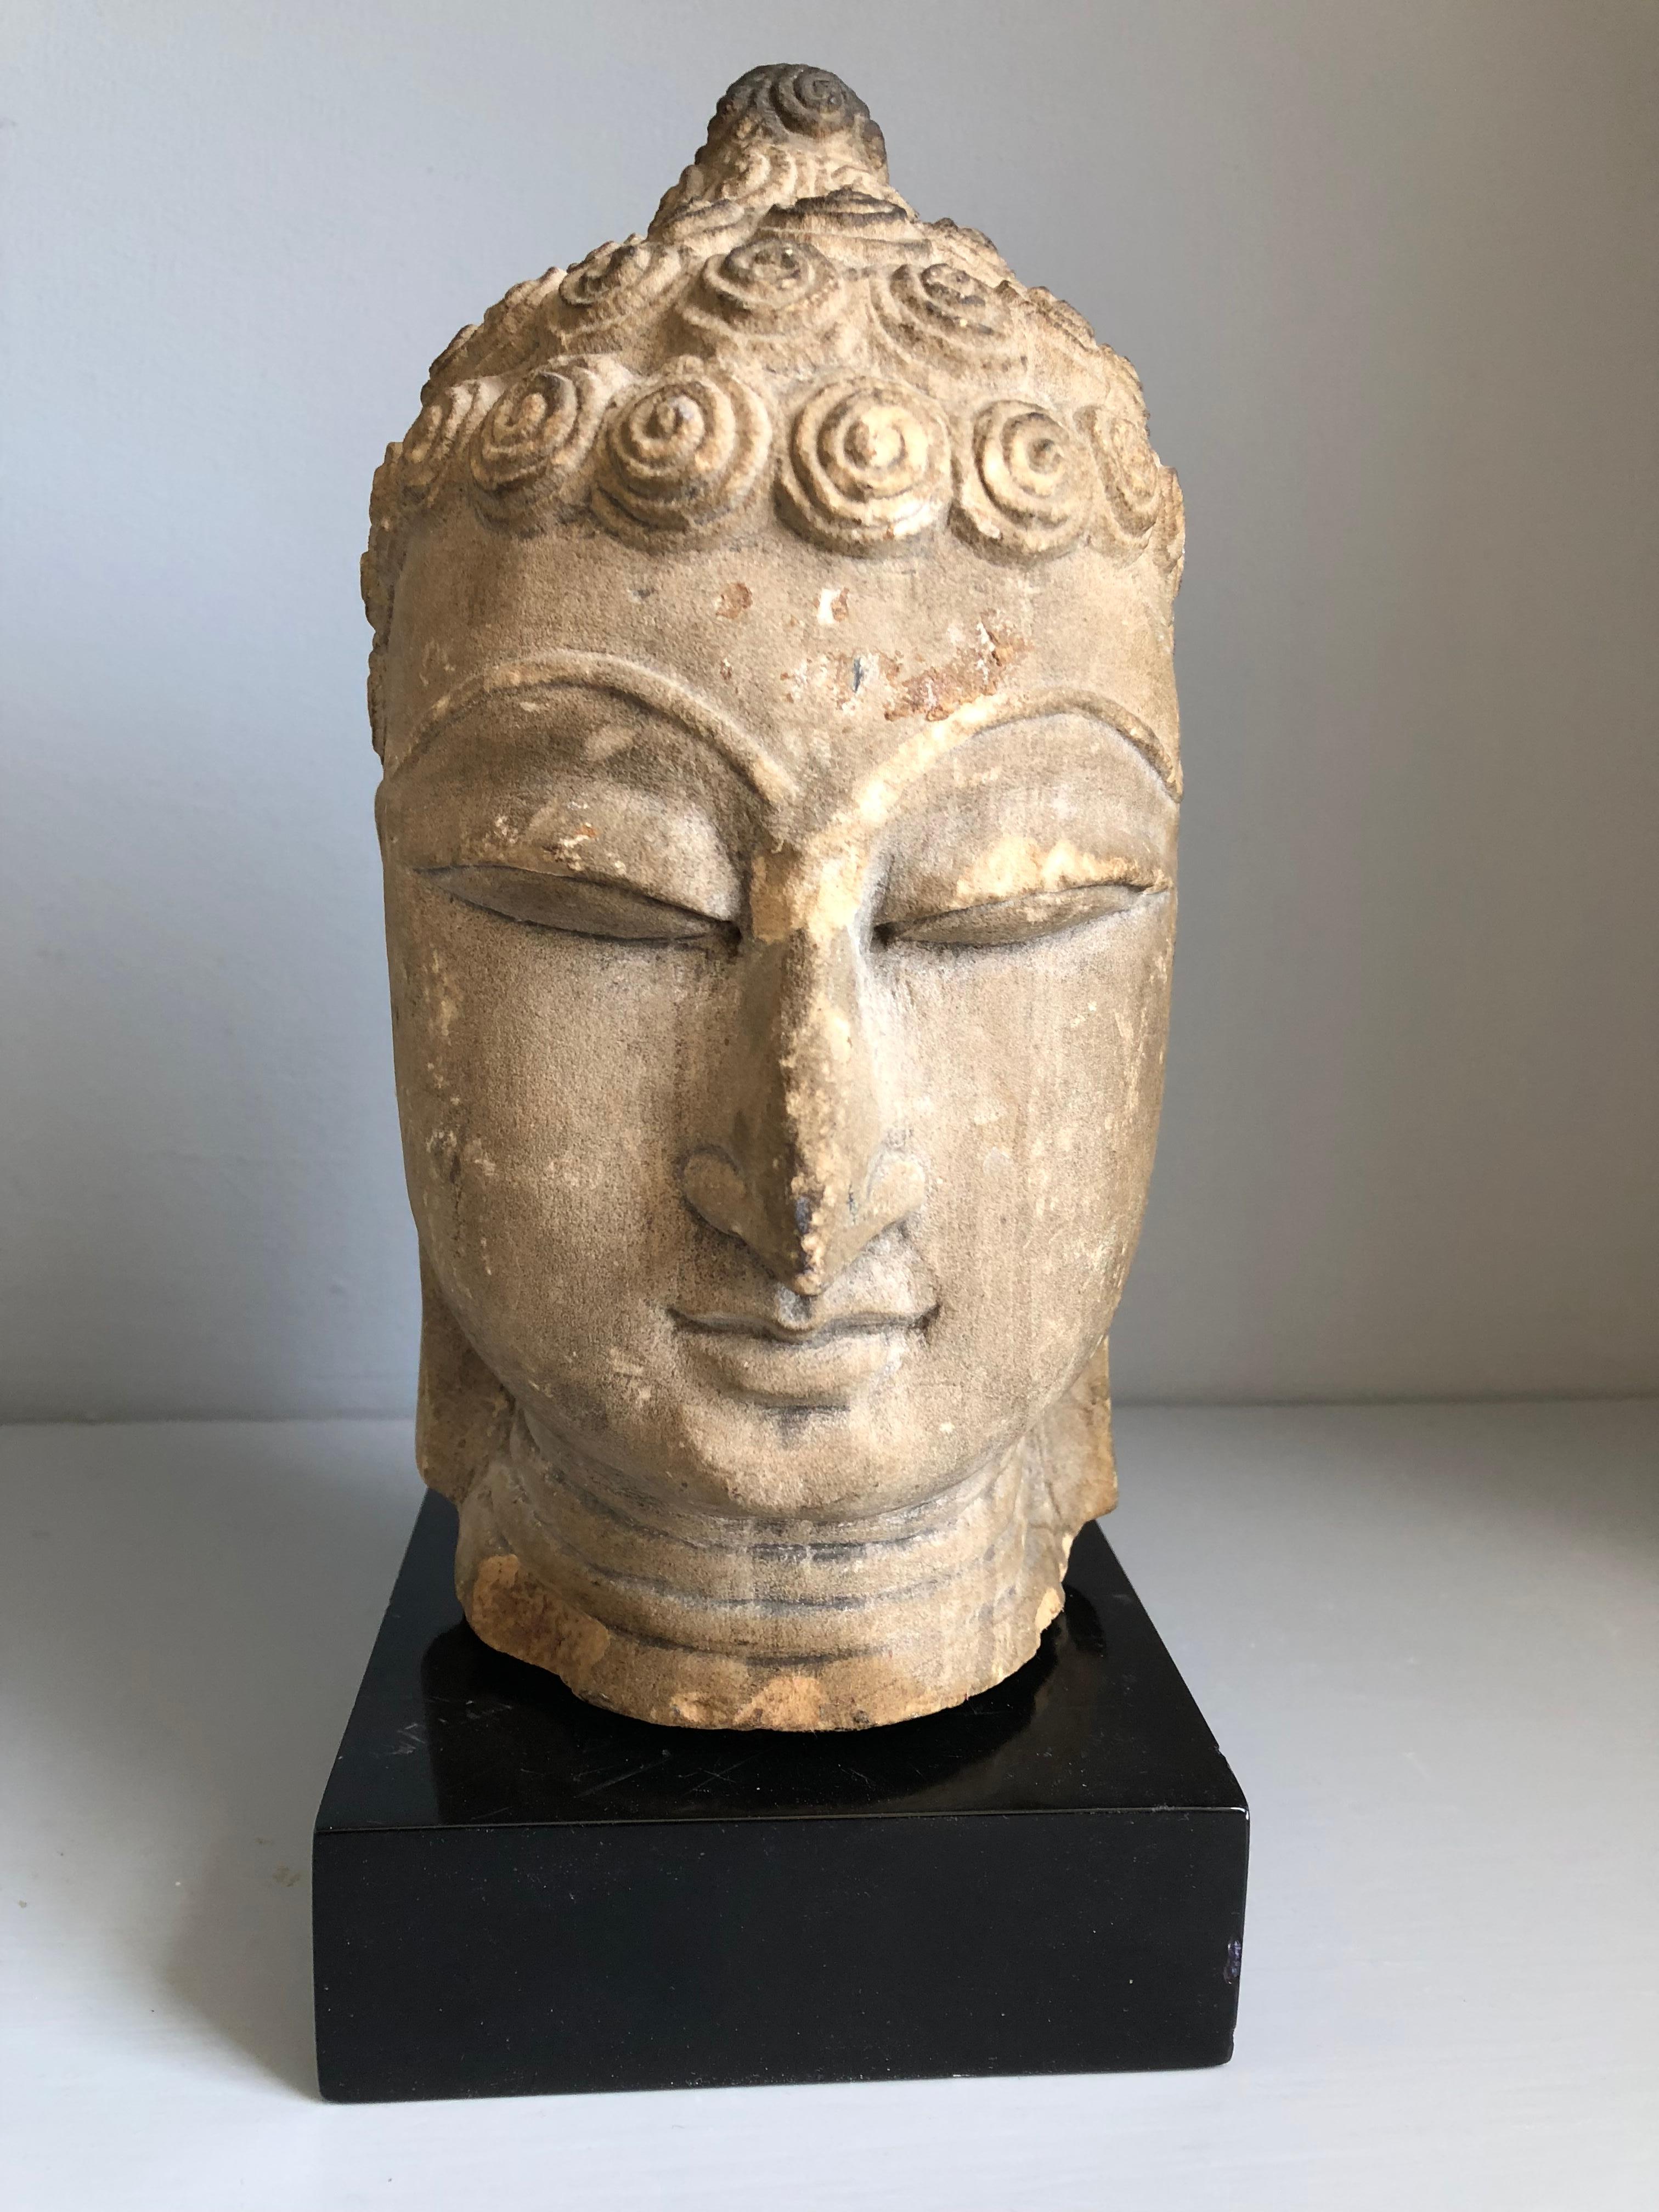 A Thai Buddha head sculpture in sandstone, Ayutthaya period, 18th century or earlier, finely sculpted, depicting the Buddha in a serene meditating pose, with a custom black lacquer base (not attached).
Head measures 5” diameter x 9” high.